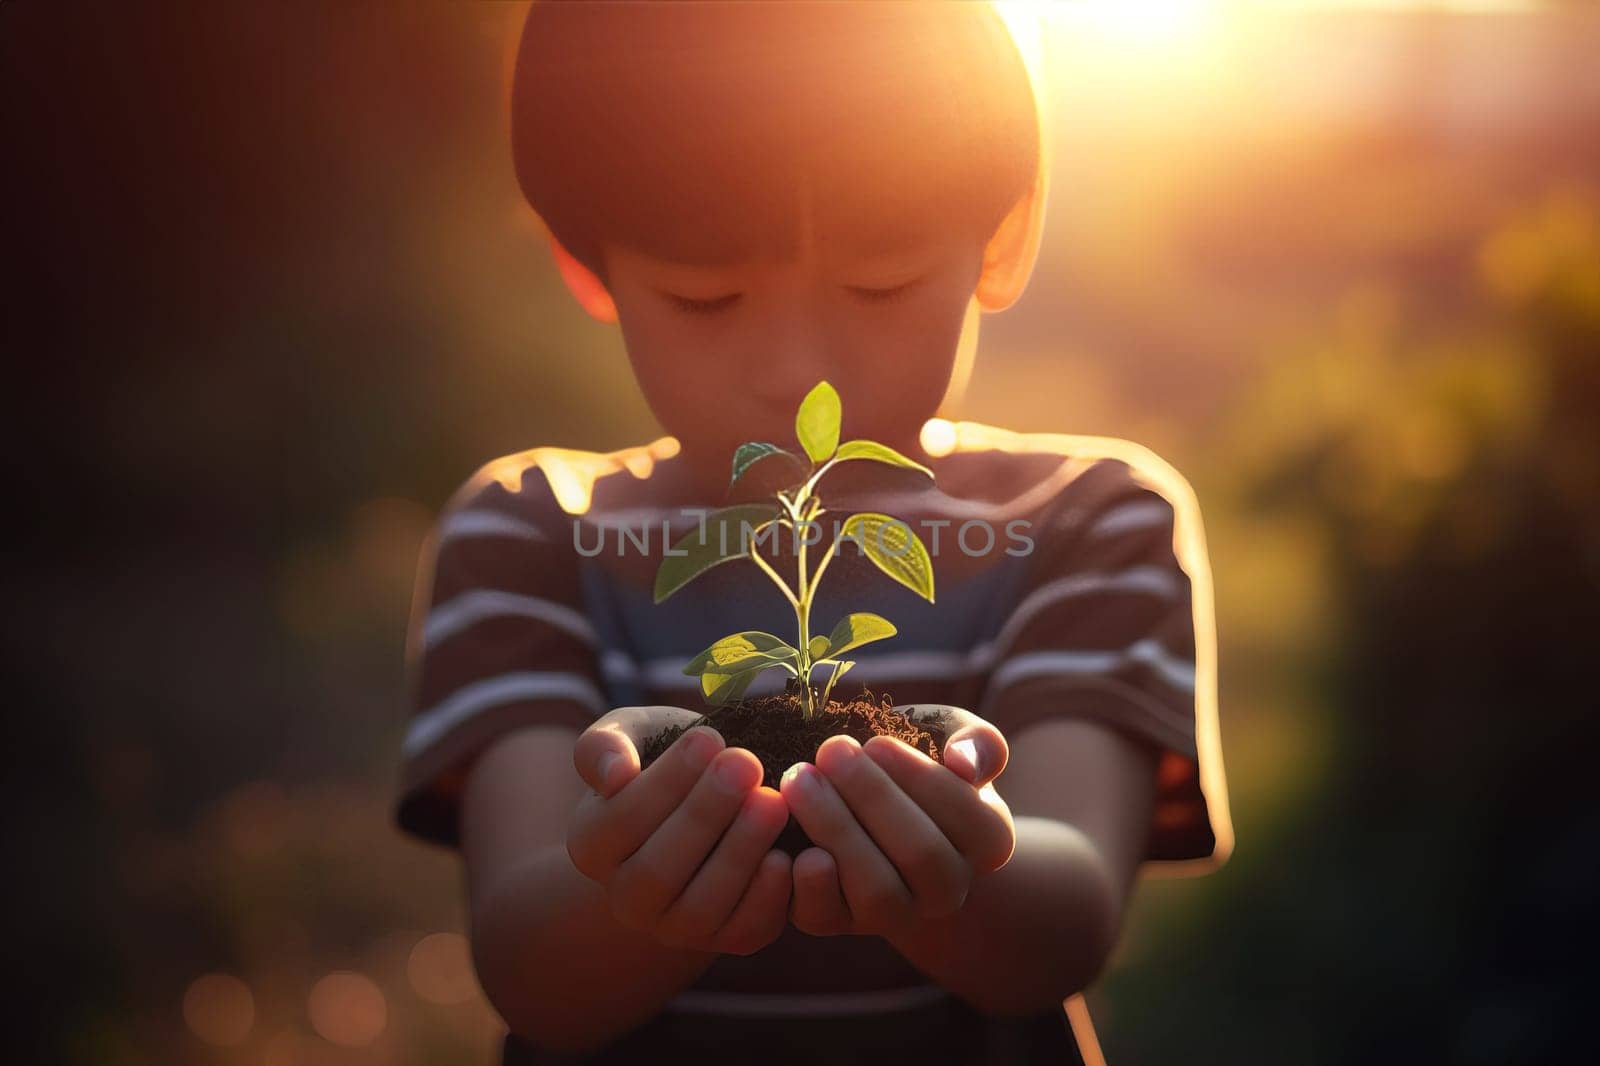 World environment day concept children's hands holding young plant with soil on blurred forests sunset background